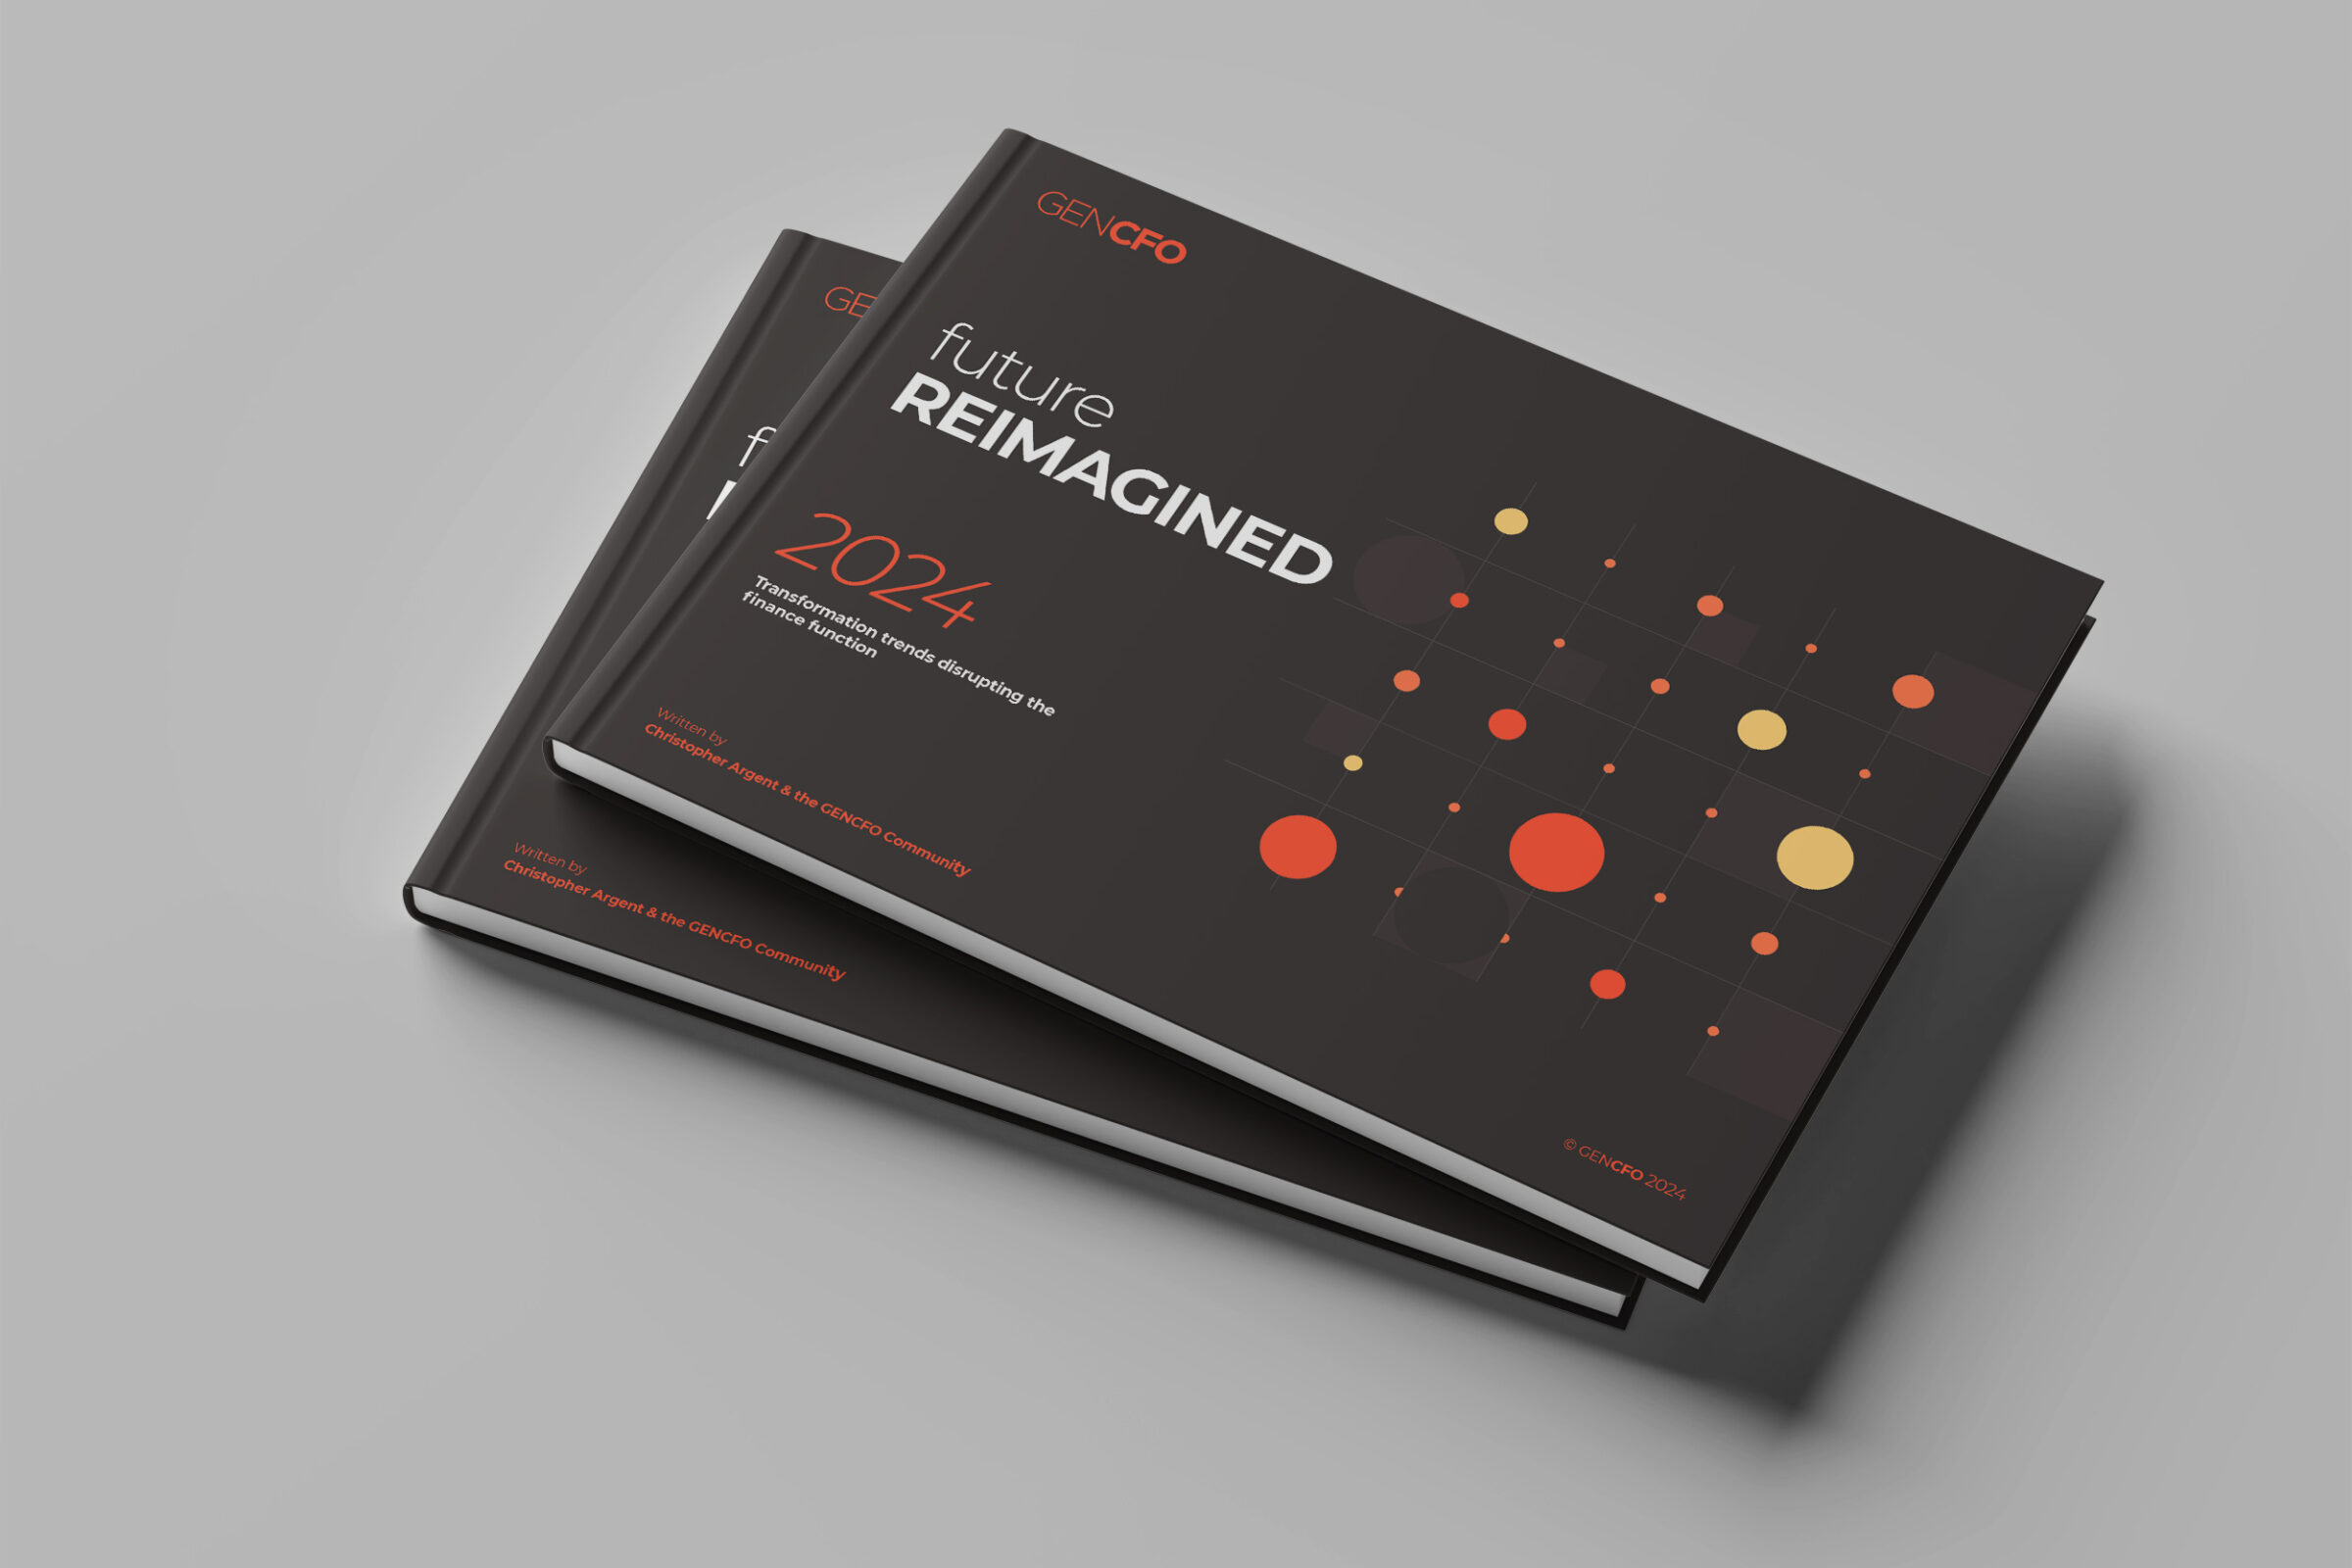 2024 report book for GENCFO, created by Inc Studio